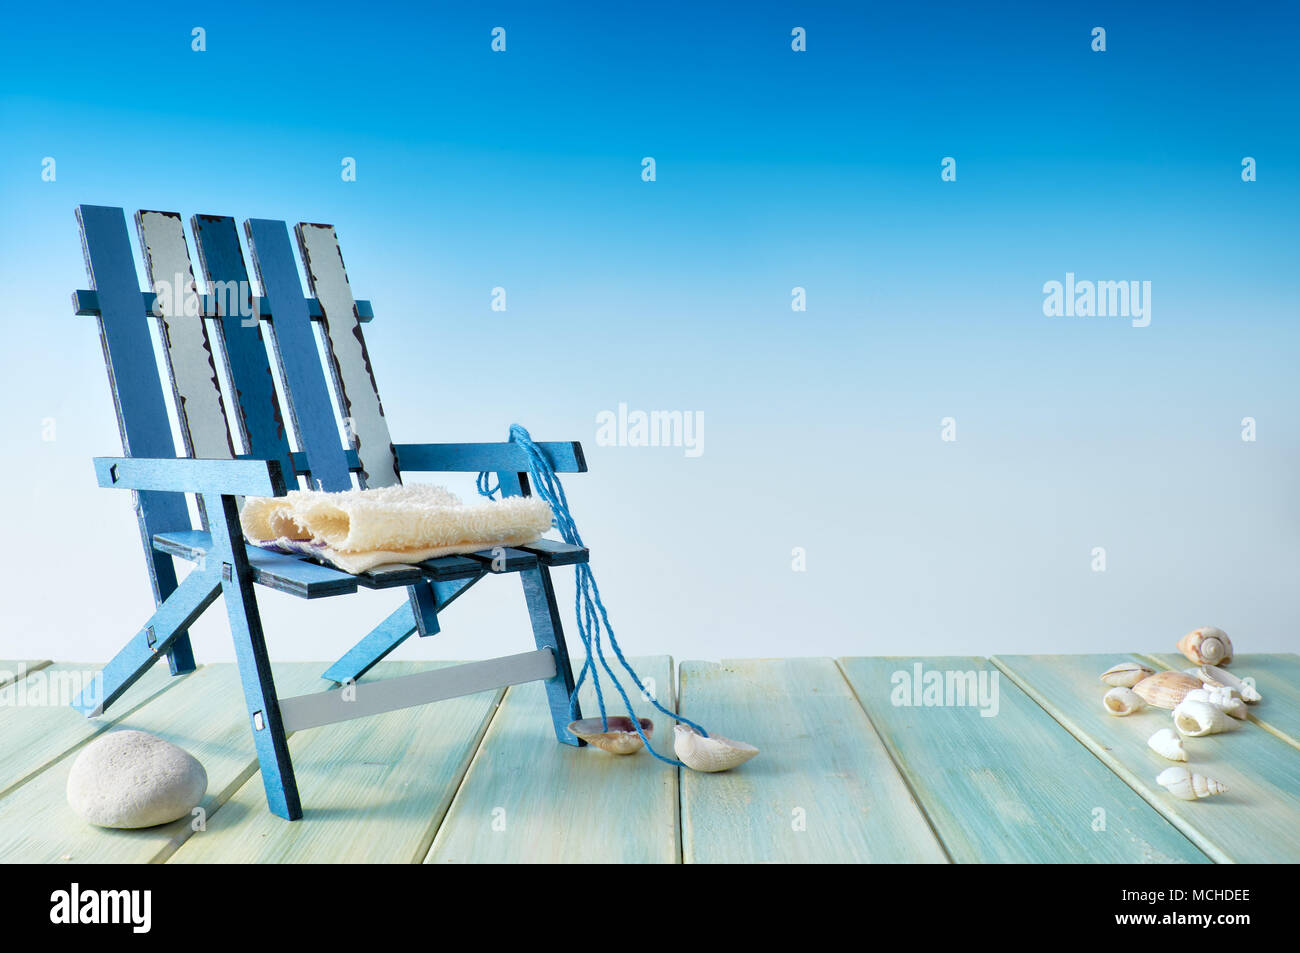 Summertime holiday background with text space. Beach chair on wooden terrace with sea shells, seaside decorations, copy-space on blue background. Stock Photo